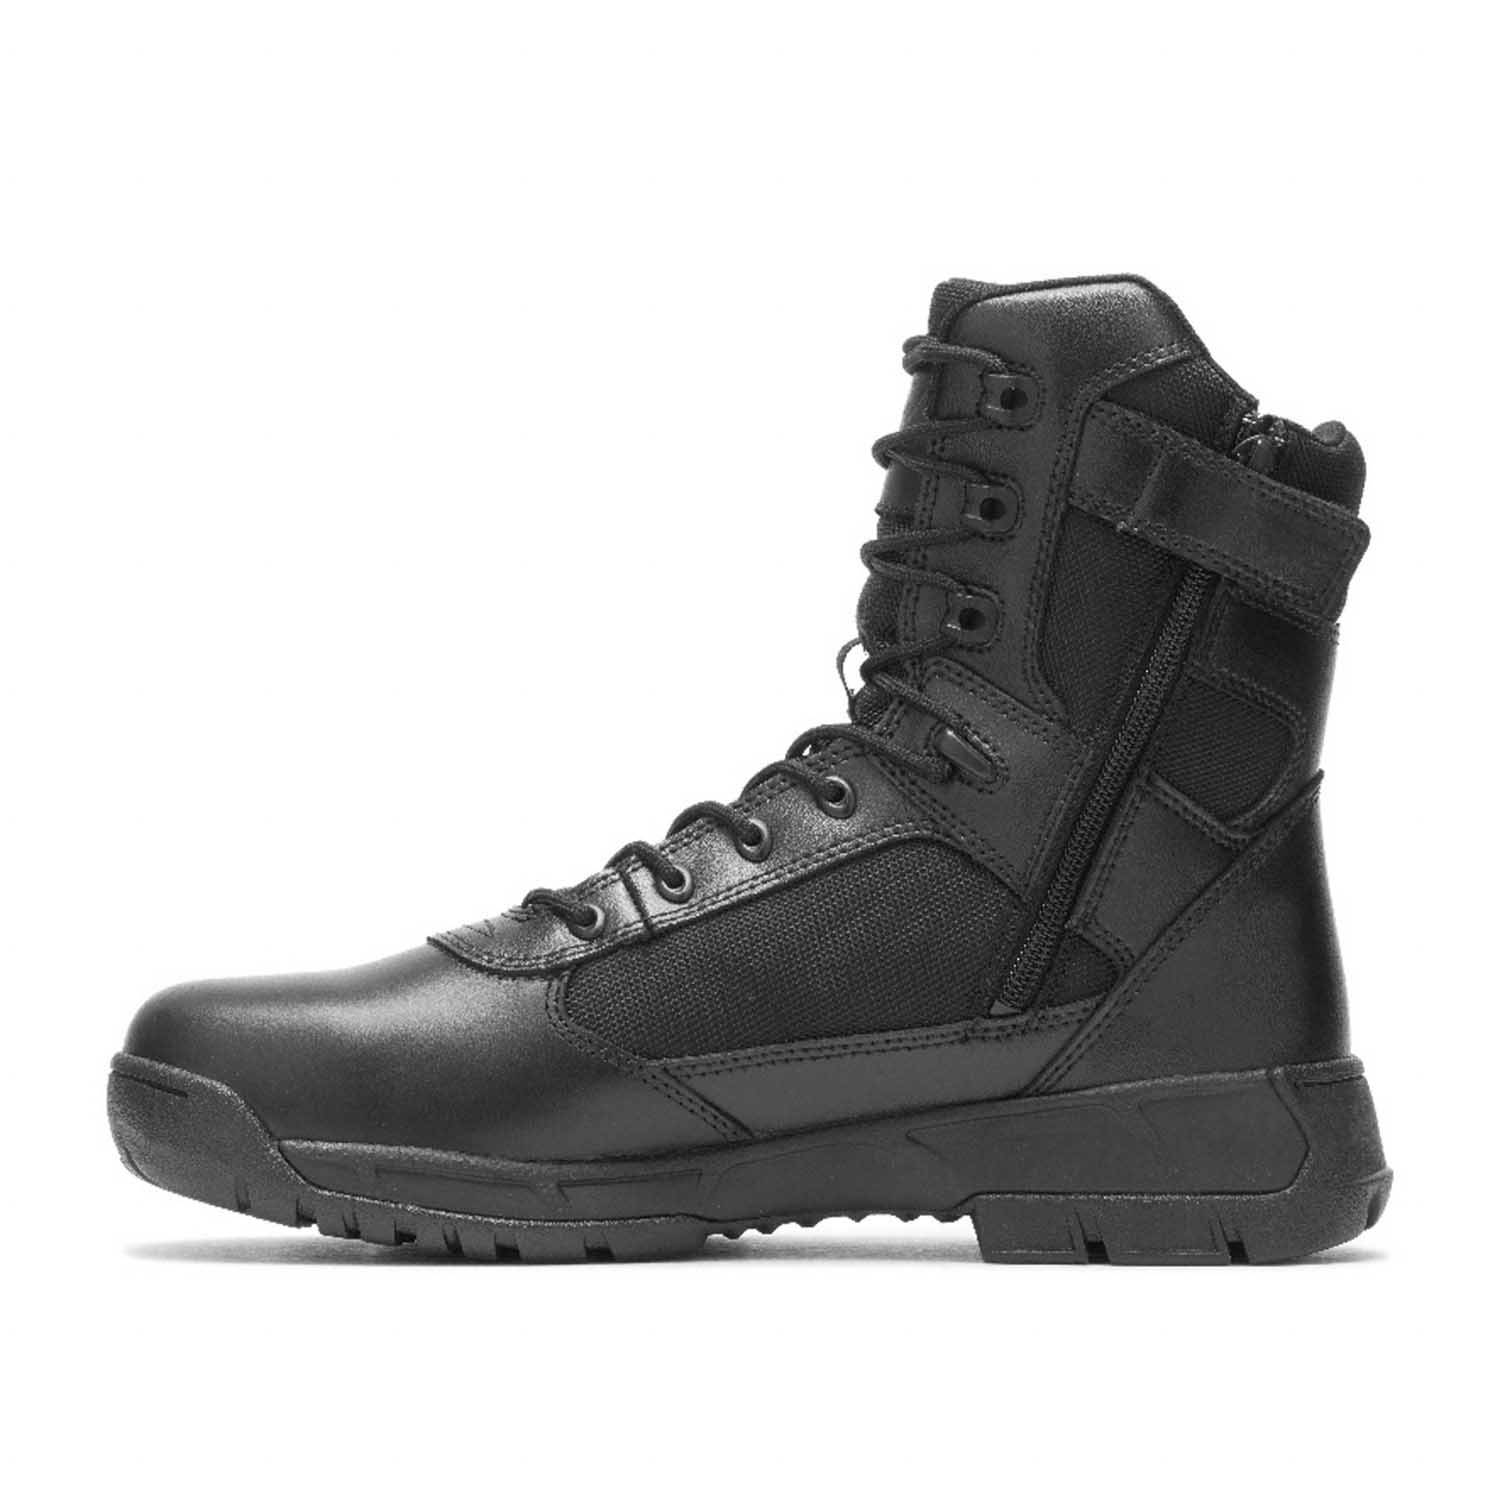 Bates Tactical Sport Tall Side-Zip Composite Toe Tactical Boots | lupon ...